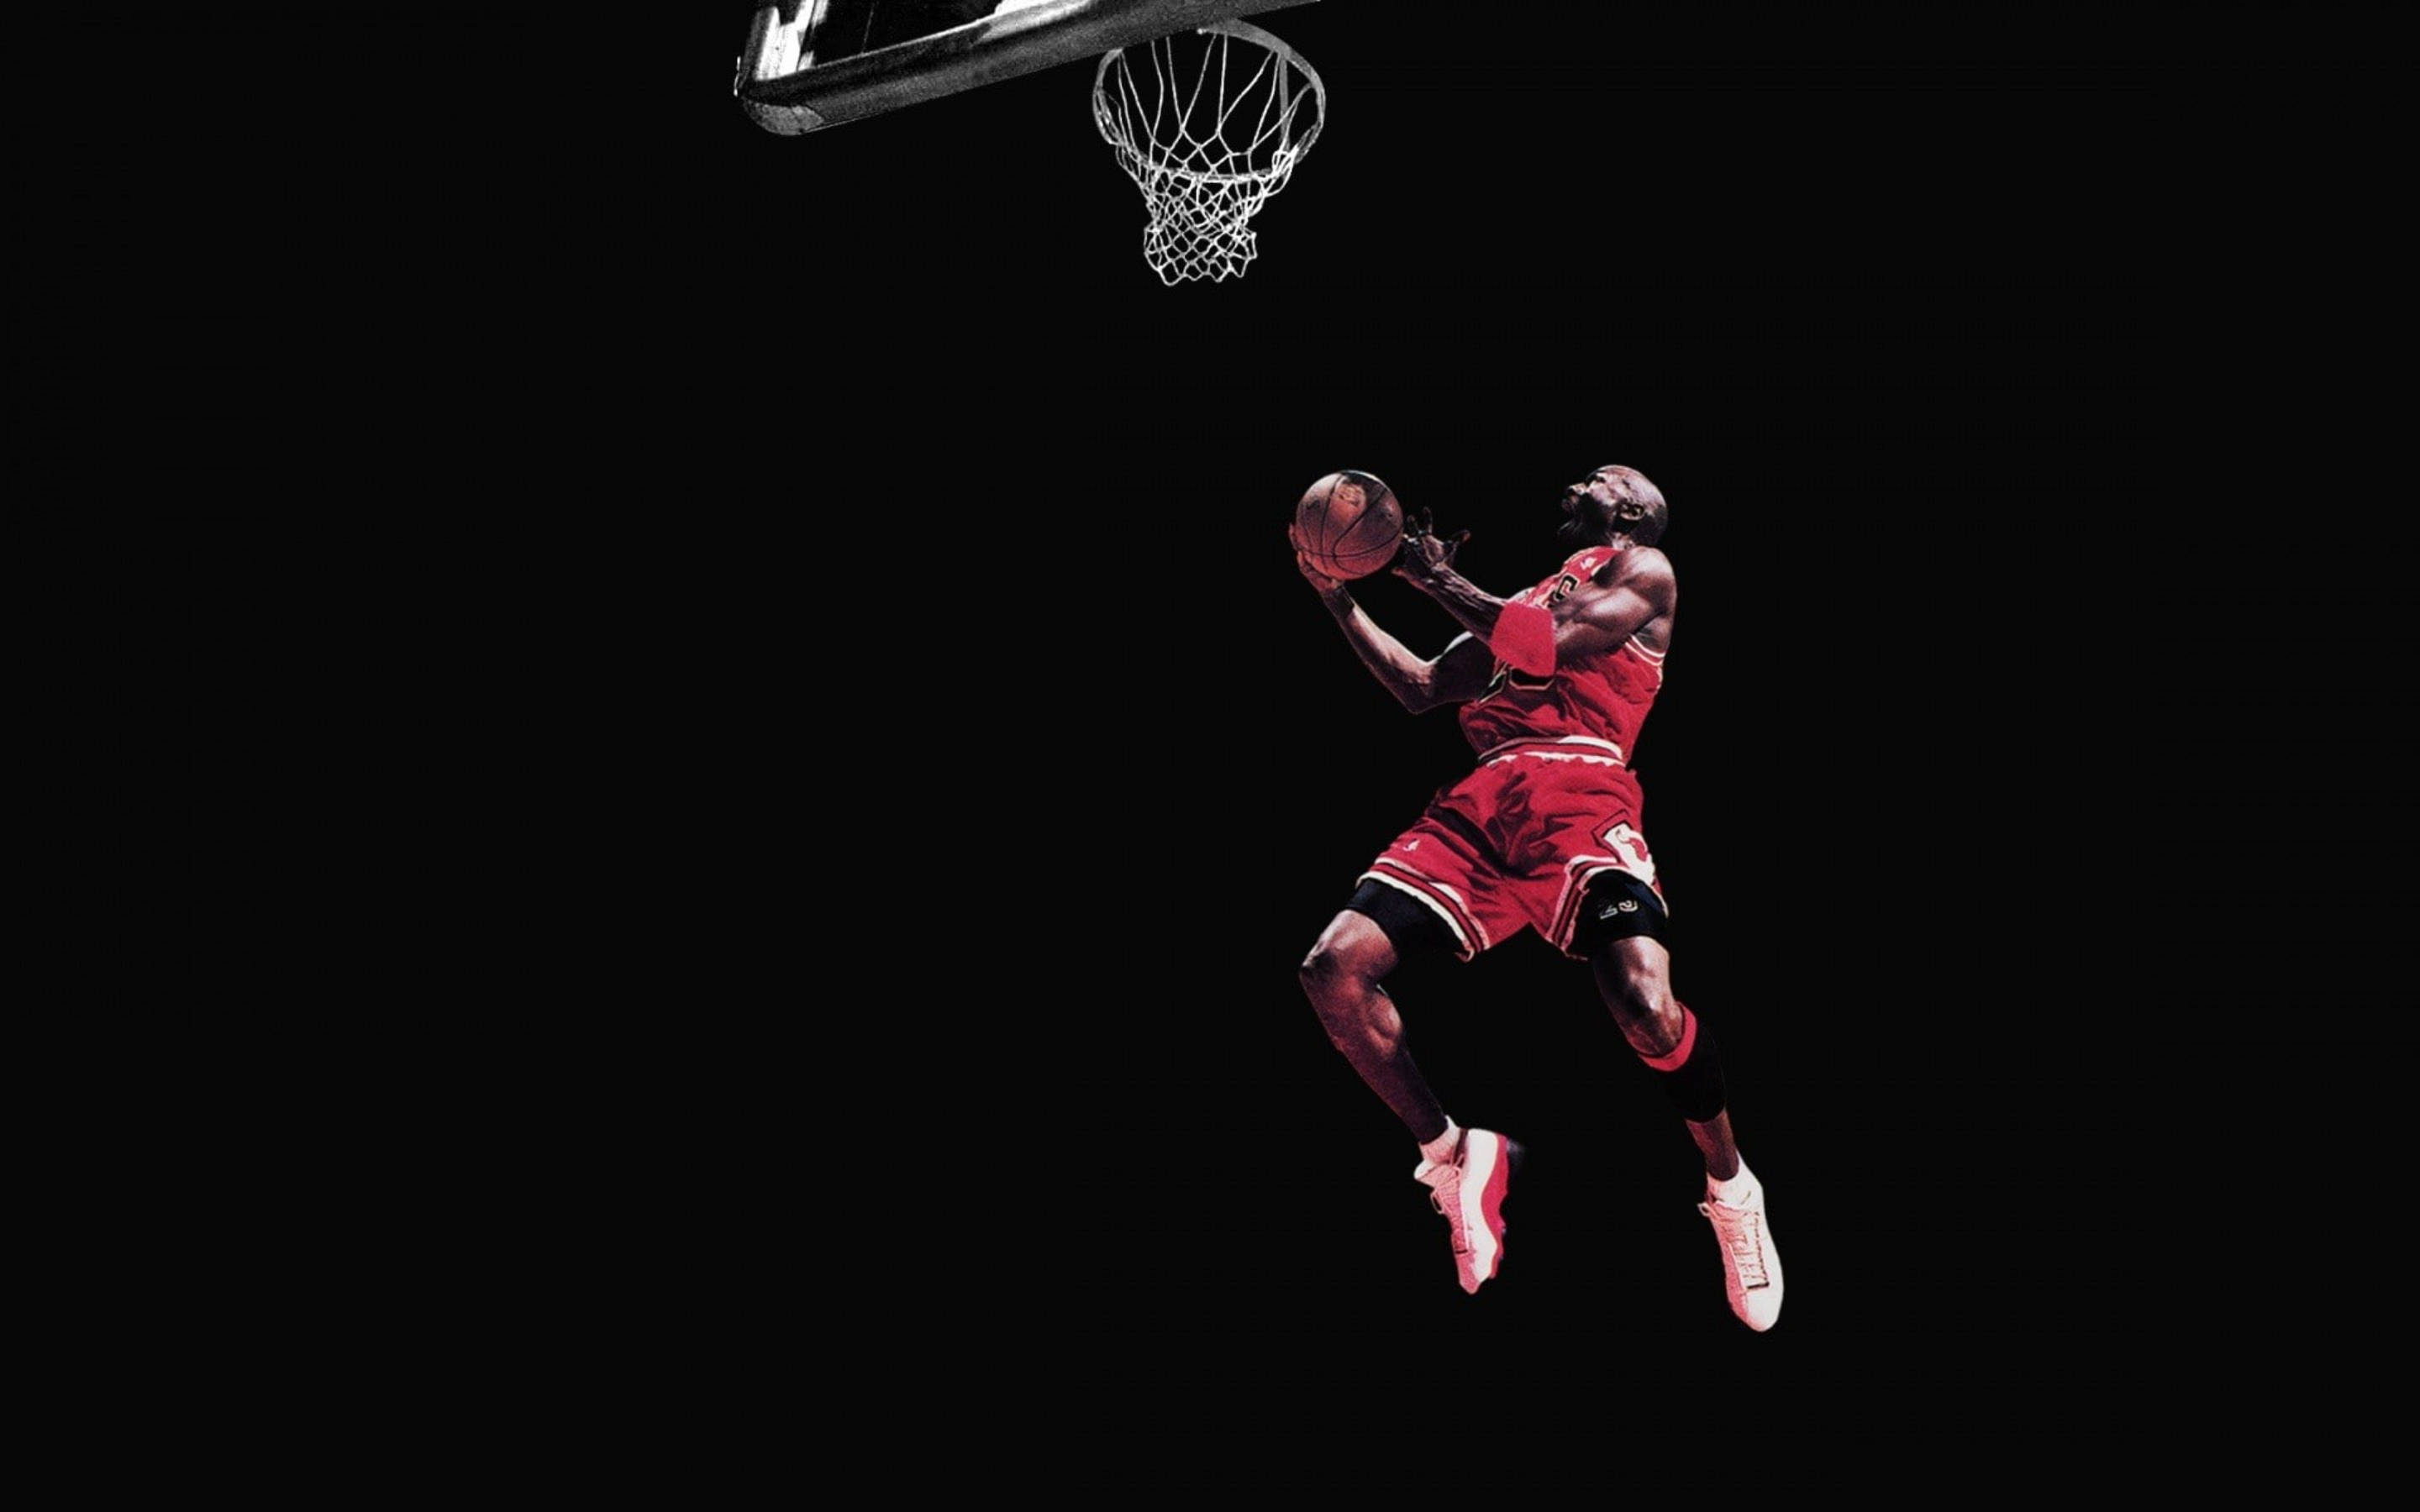 Cool Jordan In Mid-air Moment Picture